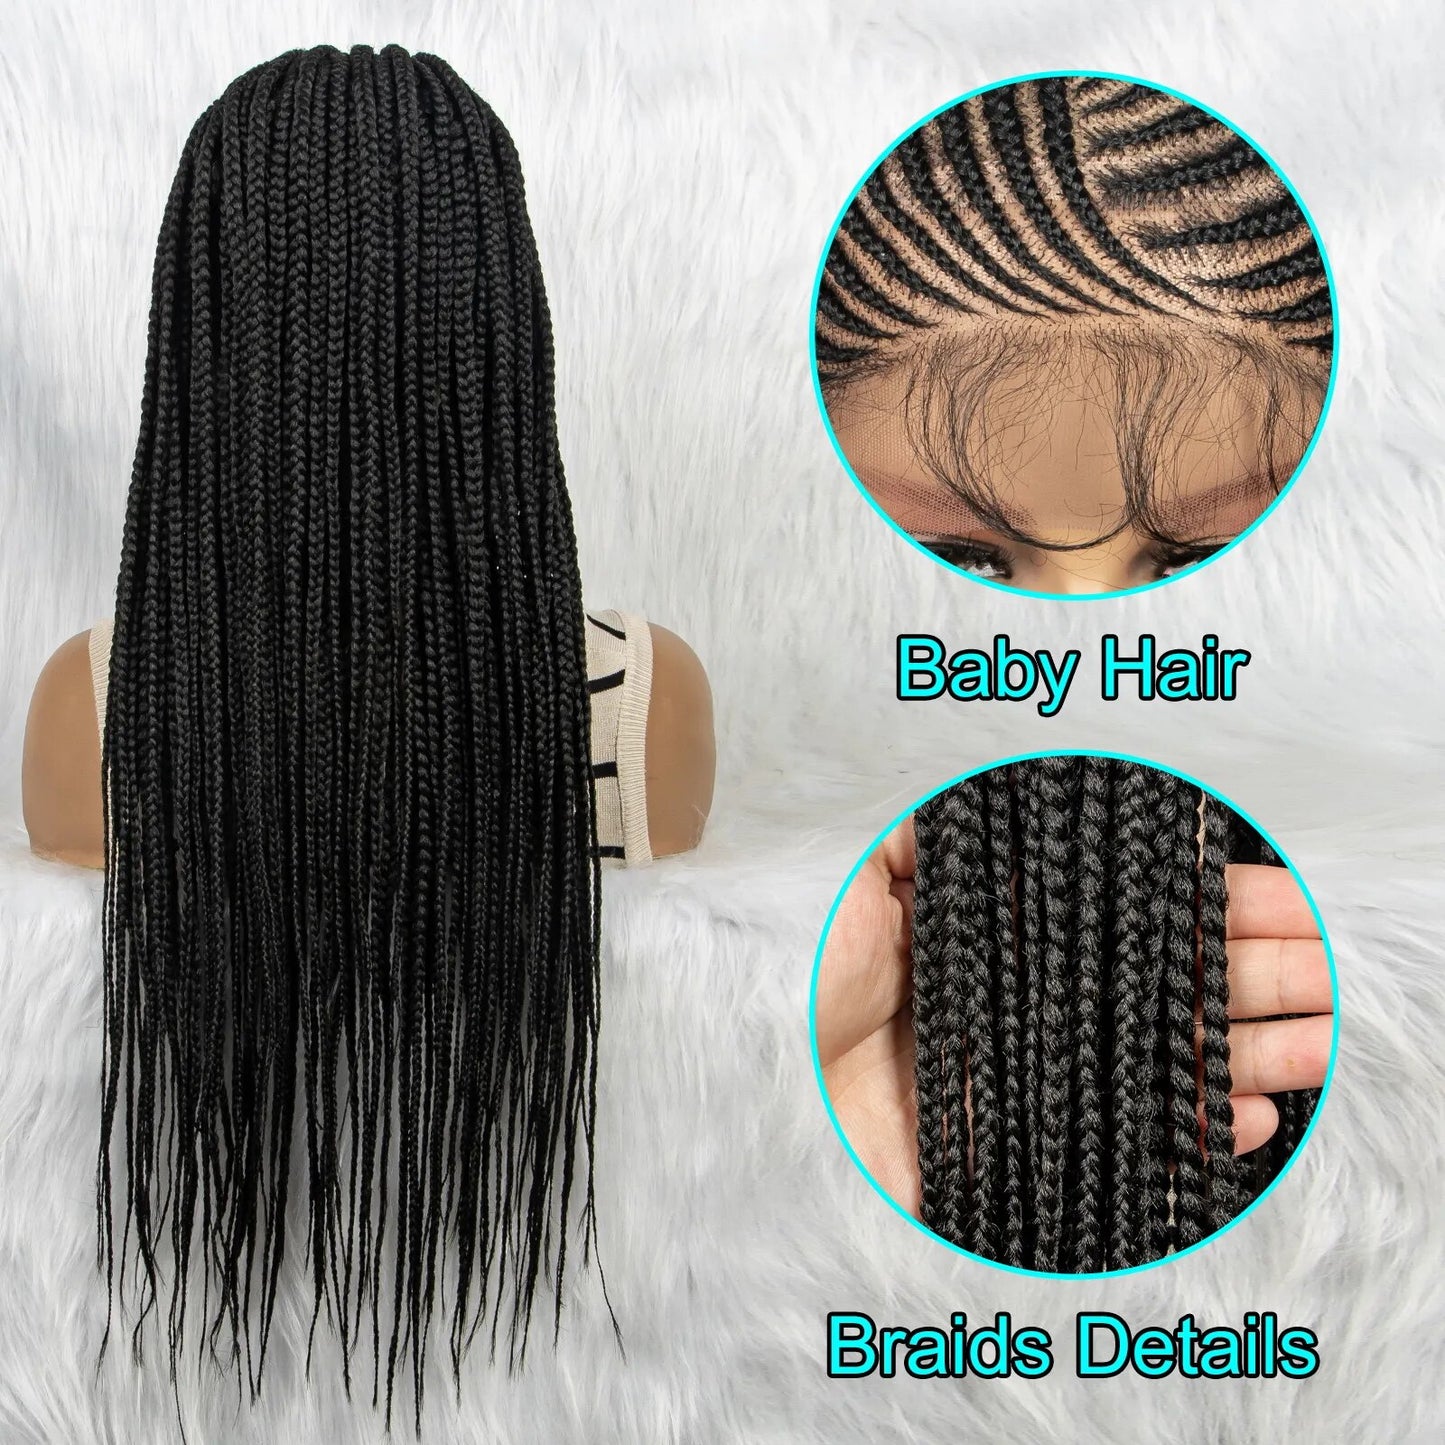 HD Lace Wigs - Braided Wigs - 13x4 HD Lace Front - Synthetic With Baby Hair - Pure Hair Gaze